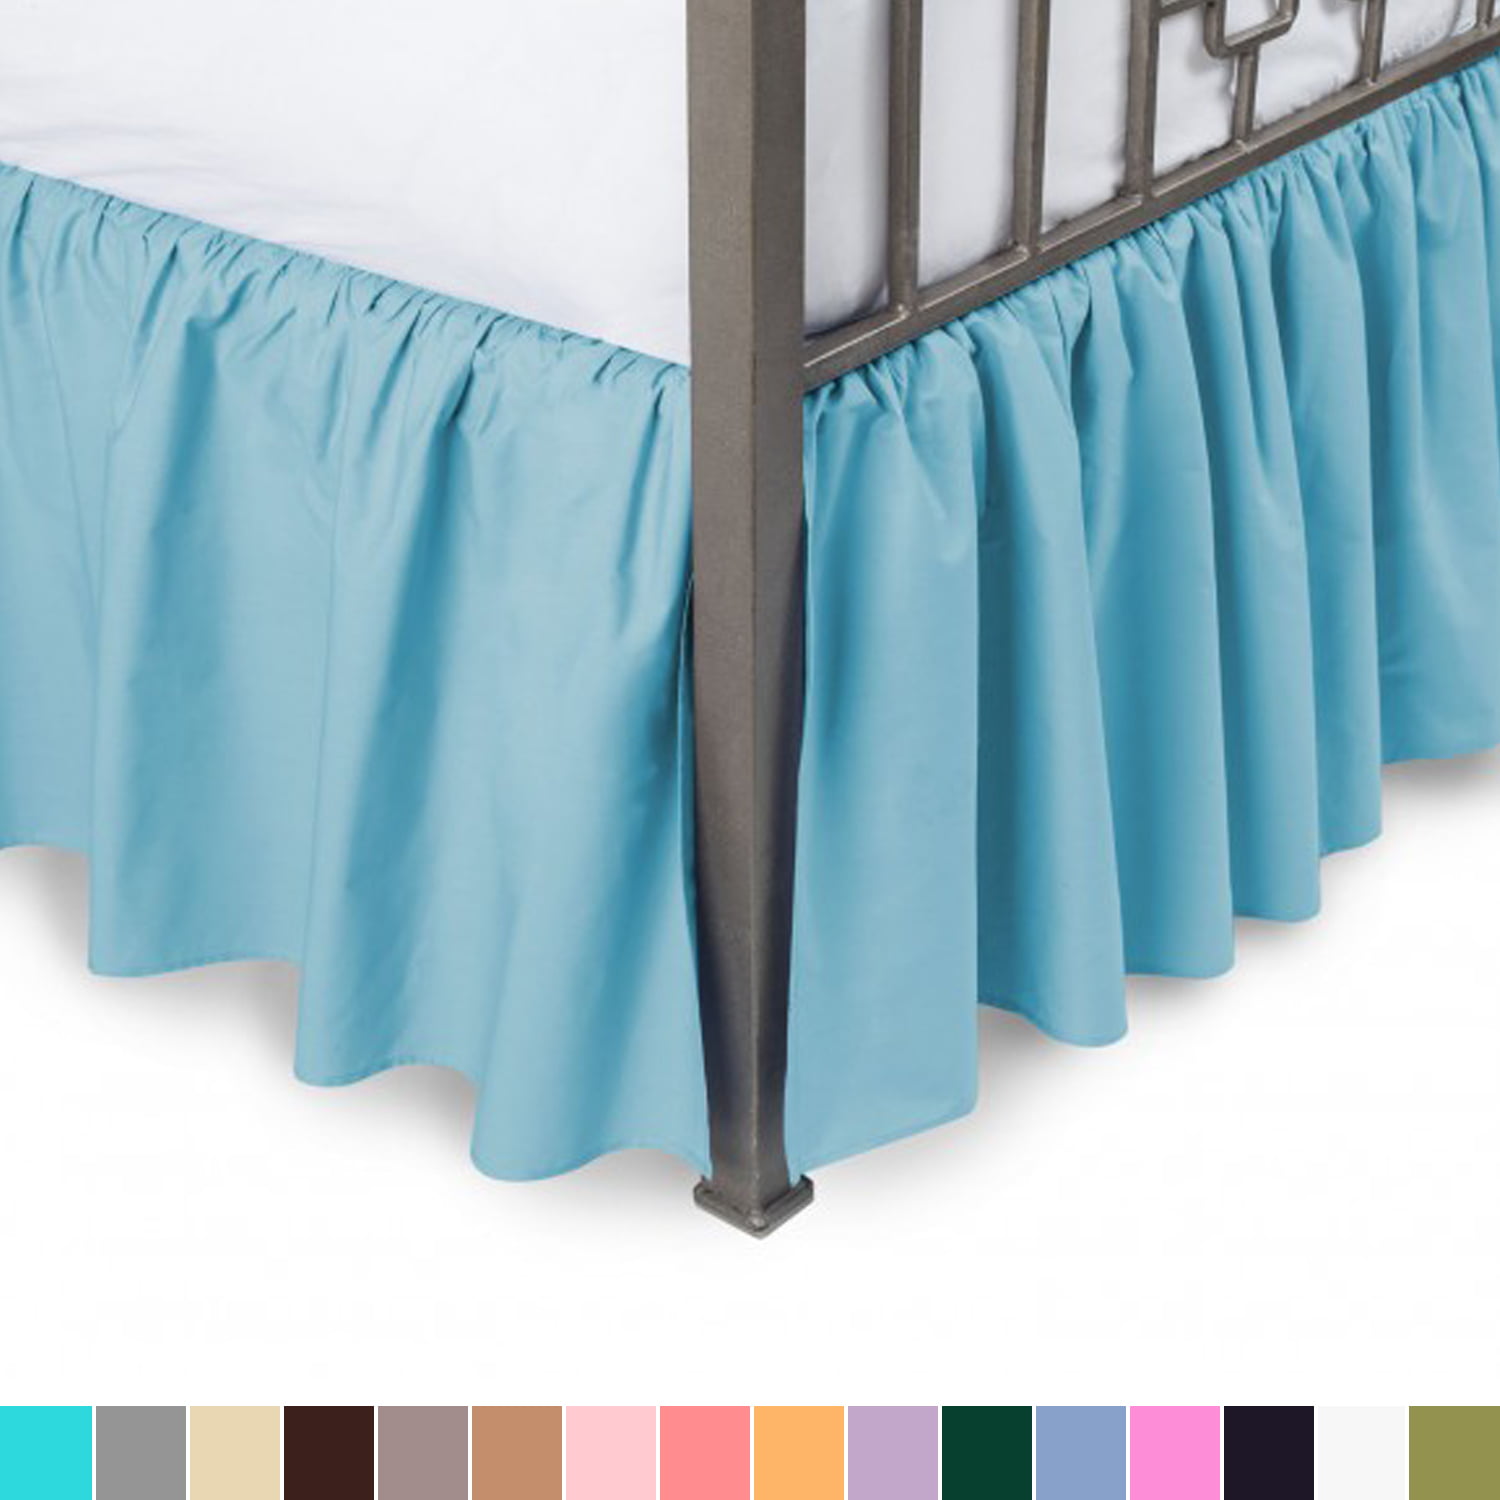 Ruffled Bed Skirt With Split Corners, King Size Bed Skirts 15 Inch Drop